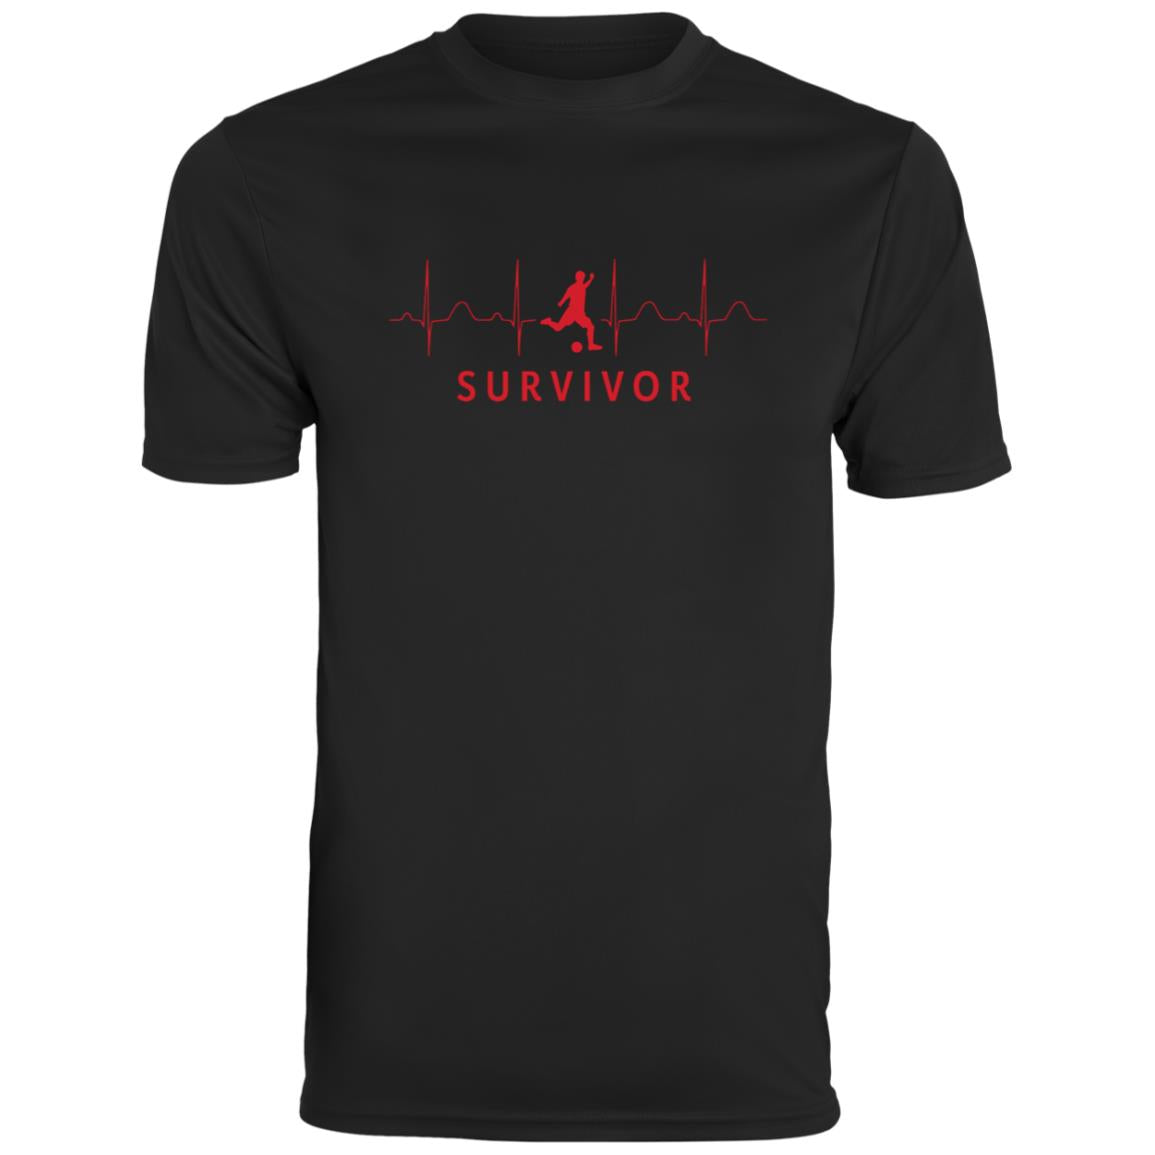 Black tee with "SURVIVOR" text along with a soccer player icon with EKG lines behind.